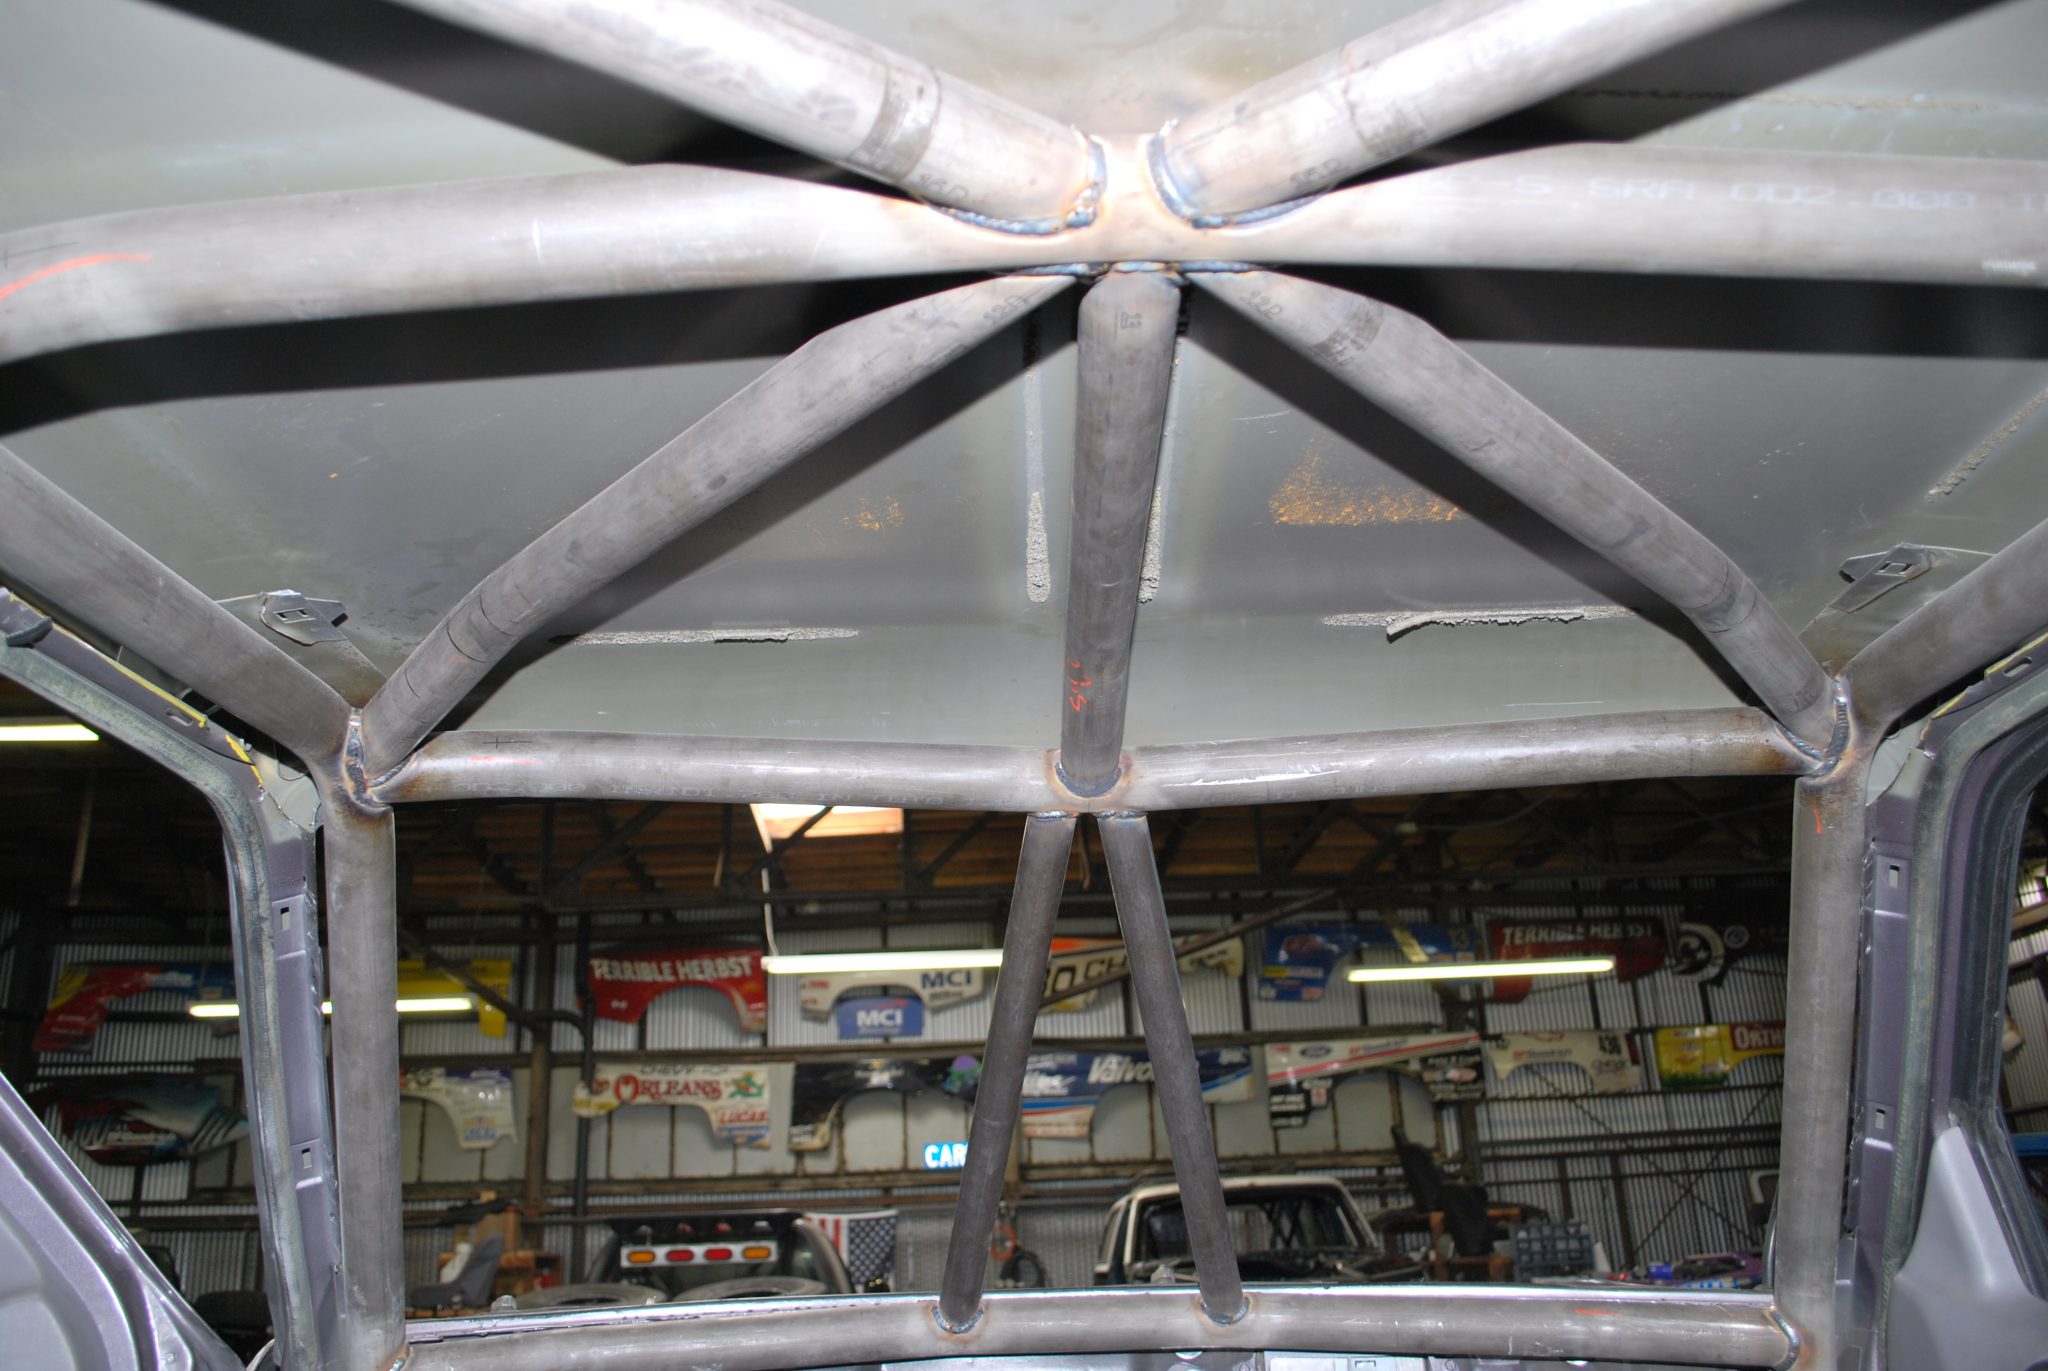 1997 Ford ranger roll cage #5